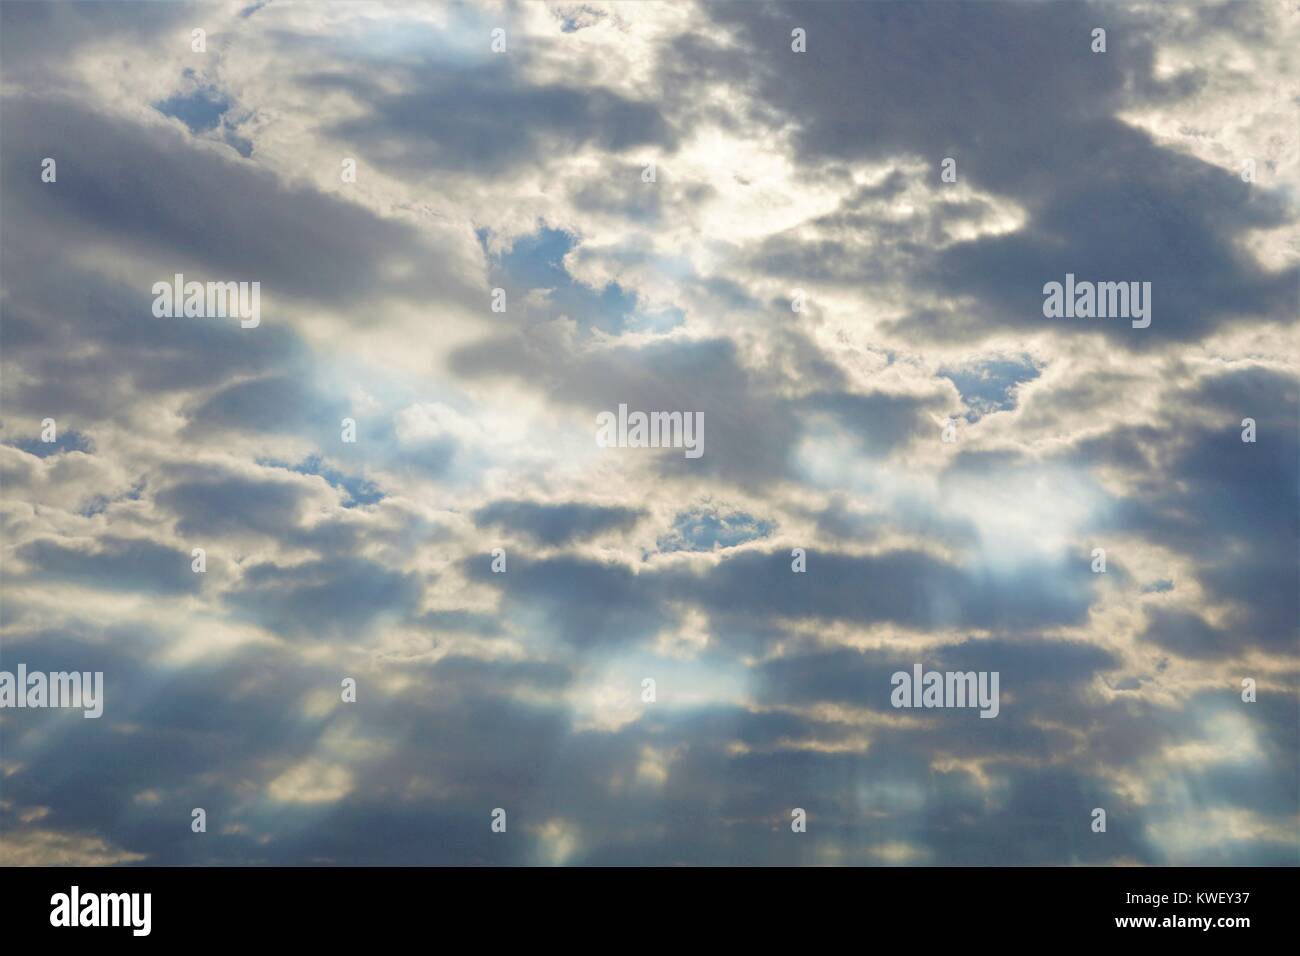 The Heavens Declare the Glory of God Stock Photo